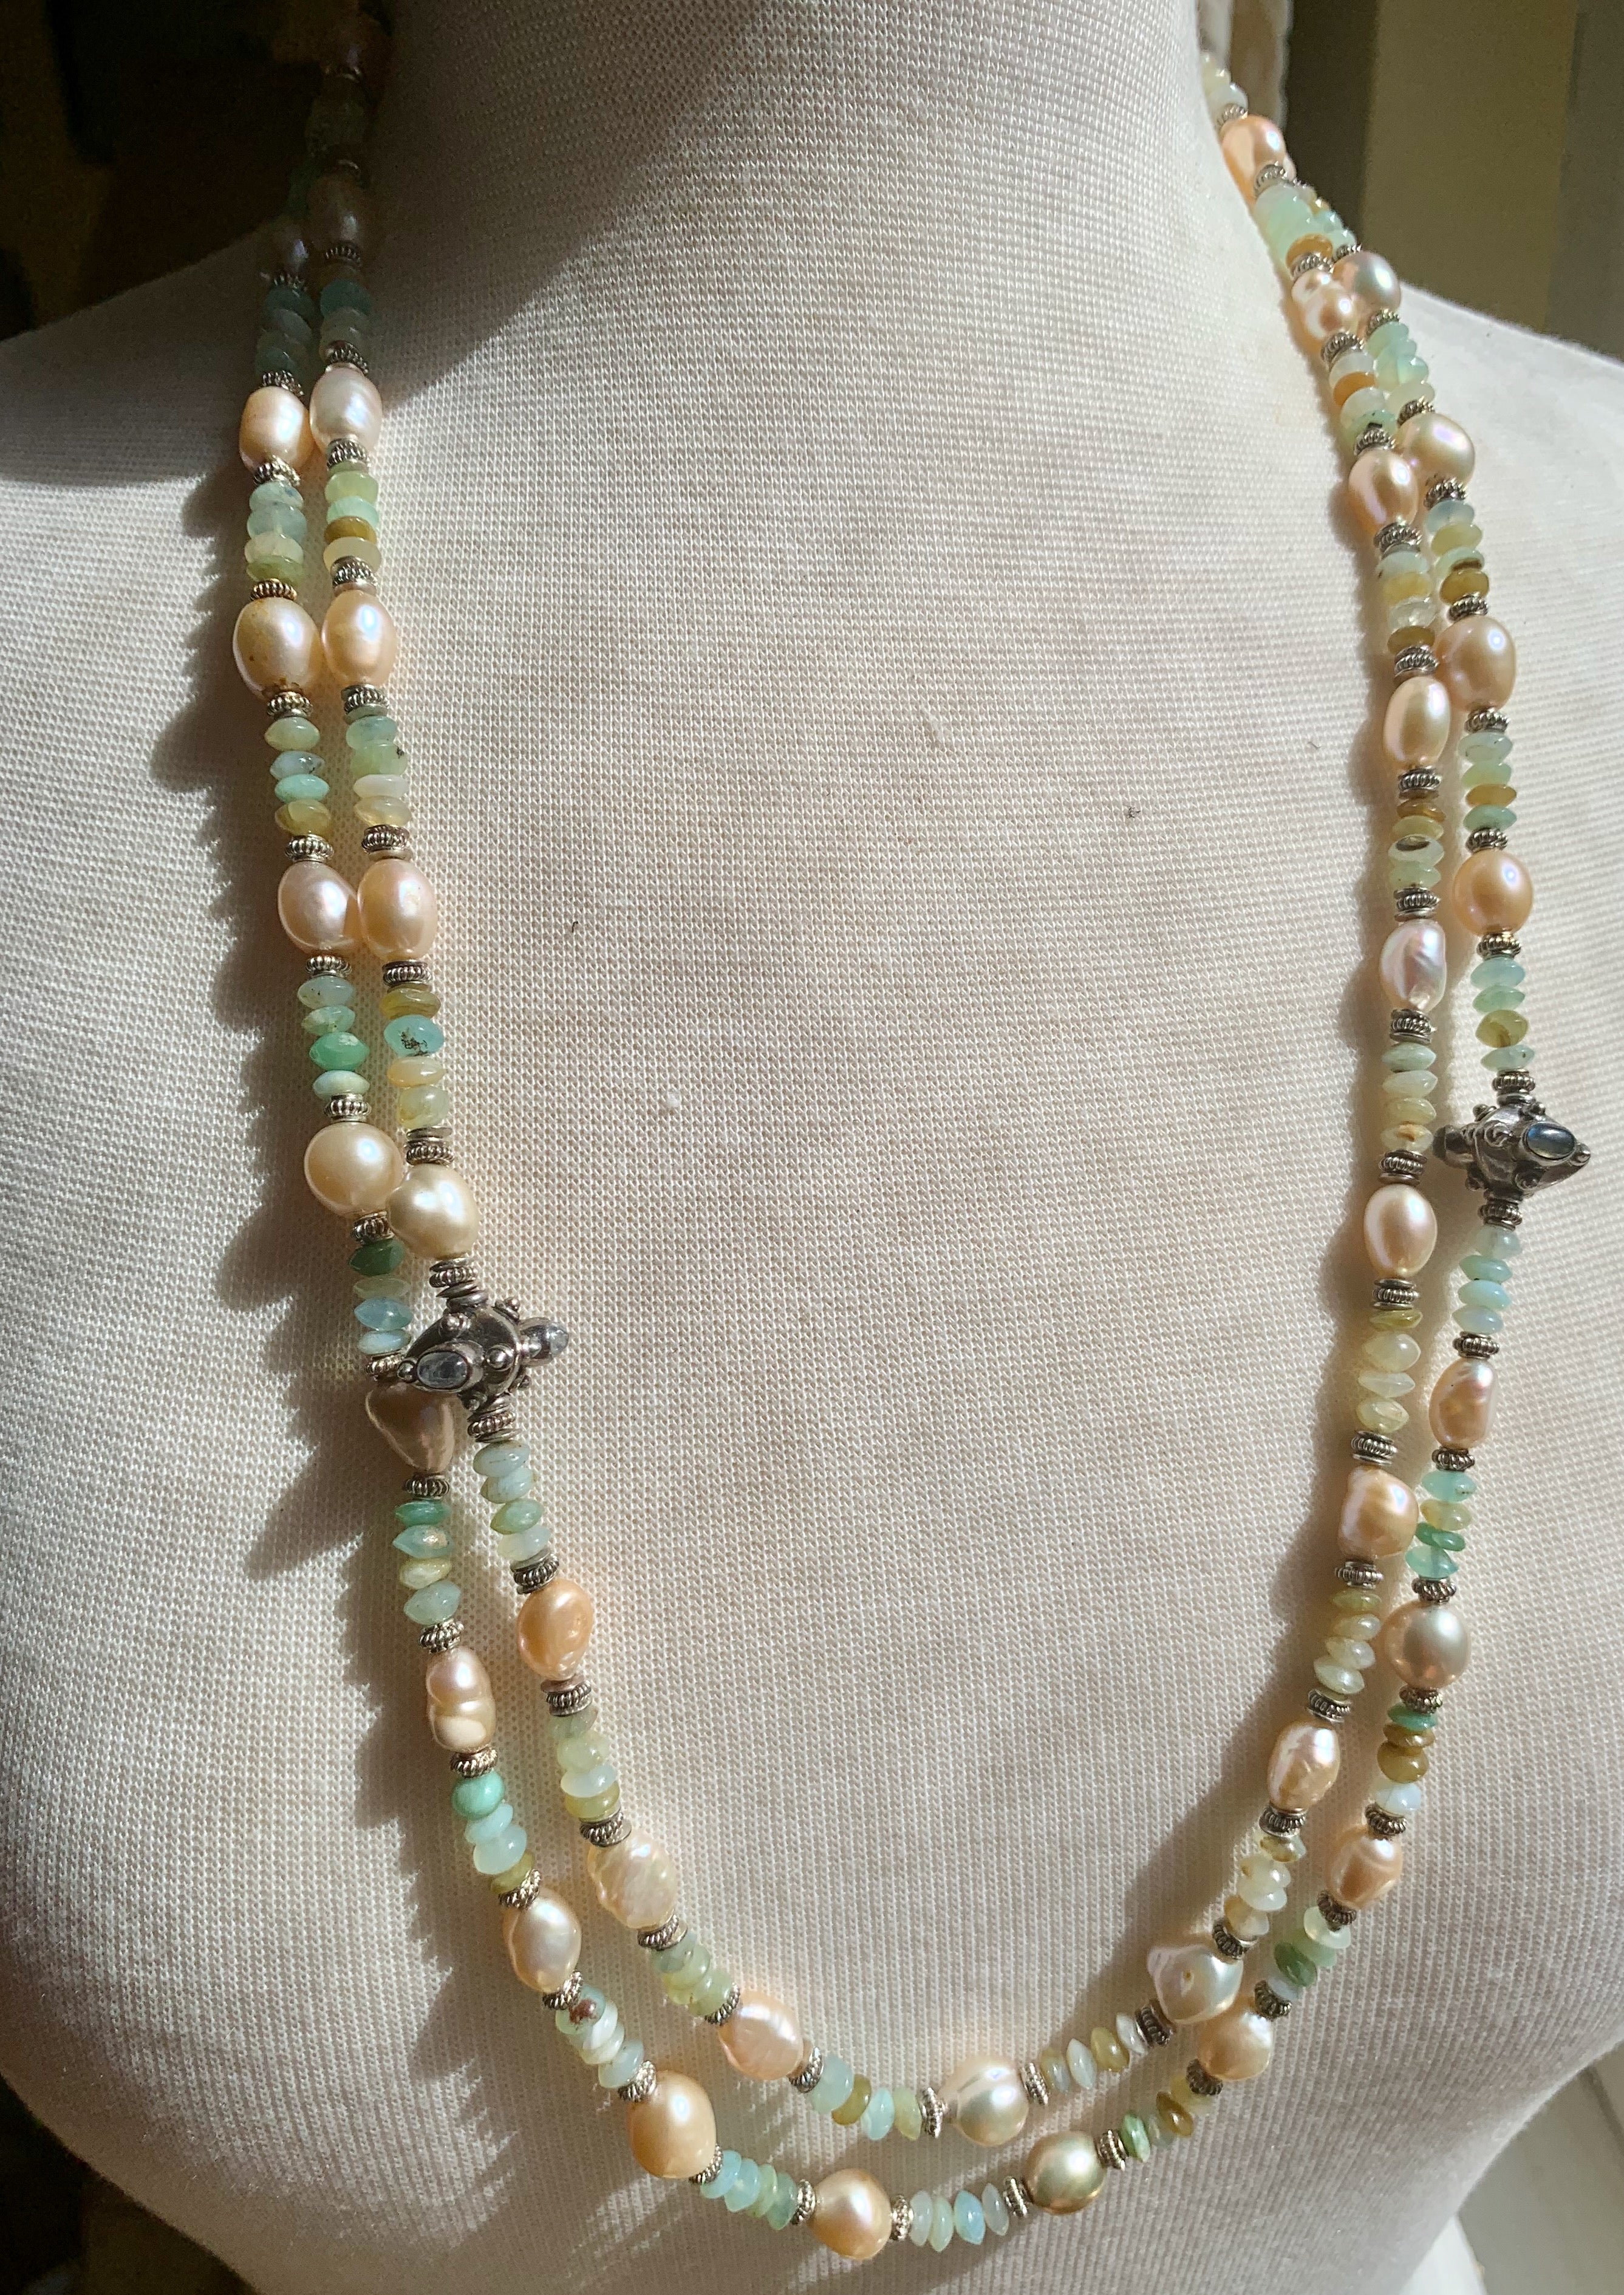 Handmade 61" Blue Peruvian Opal Necklace with Pearls, Rainbow Moonstone Beads For Sale